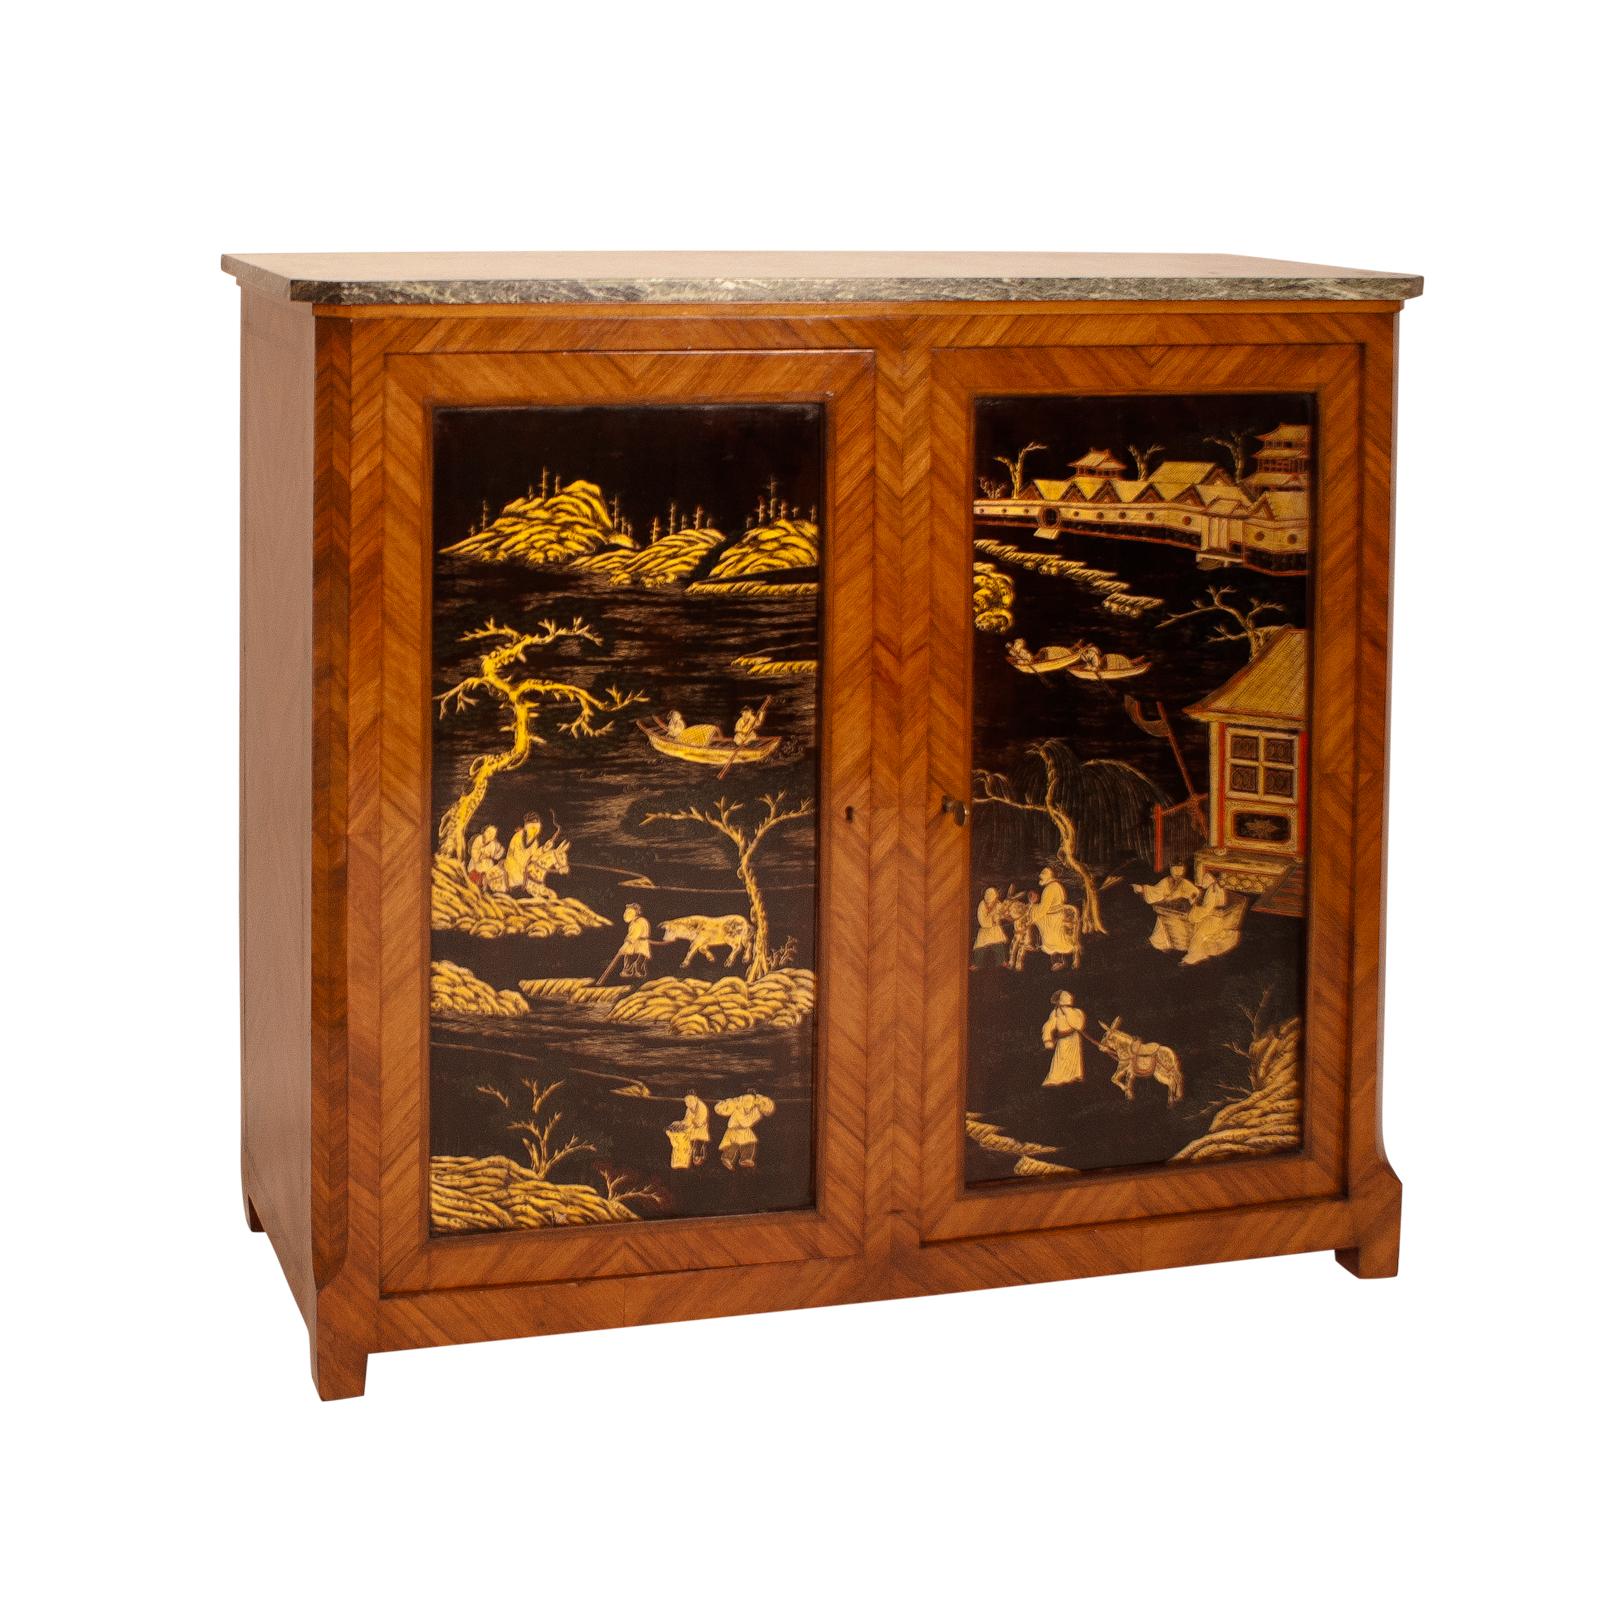 A French Belle Époque cabinet decorated with Chinoisiere panels and a marble top, circa 1900. This piece is very decorative and unusually narrow. The marble top make is useful in a high traffic area like an entry hall. Pieces like these where first